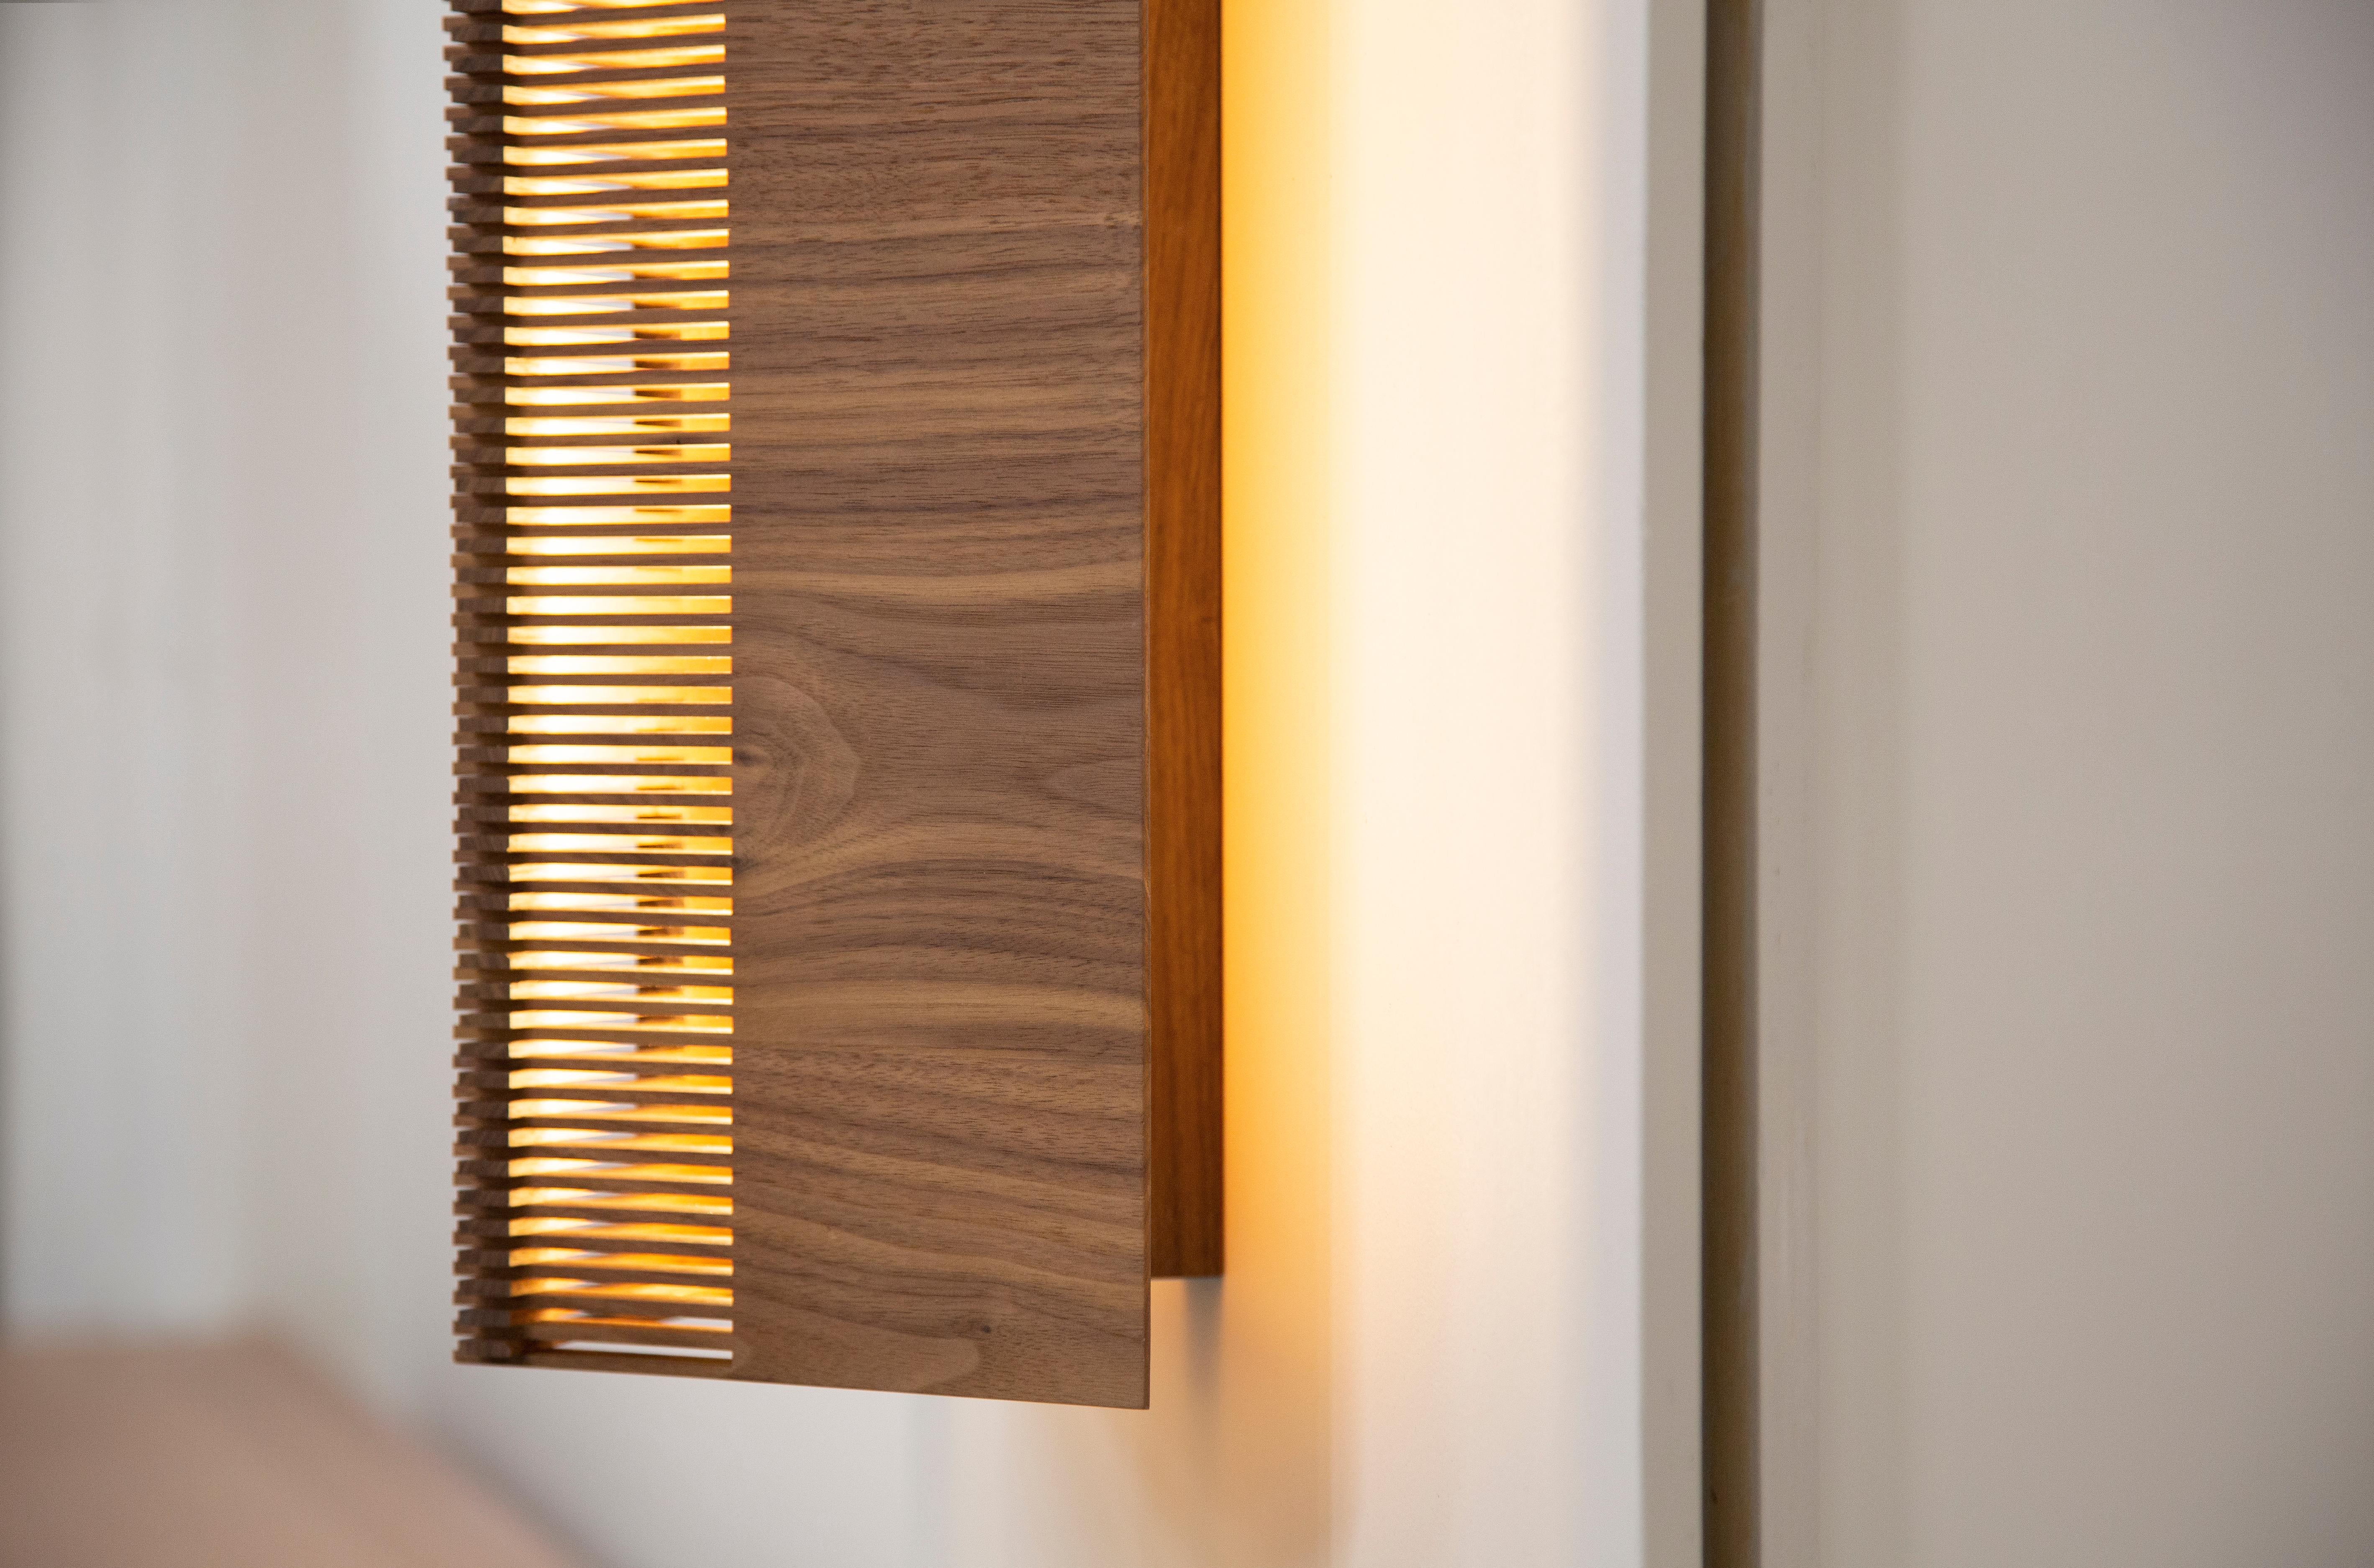 Woodwork Riviera Sconce in Oiled Walnut by May Furniture